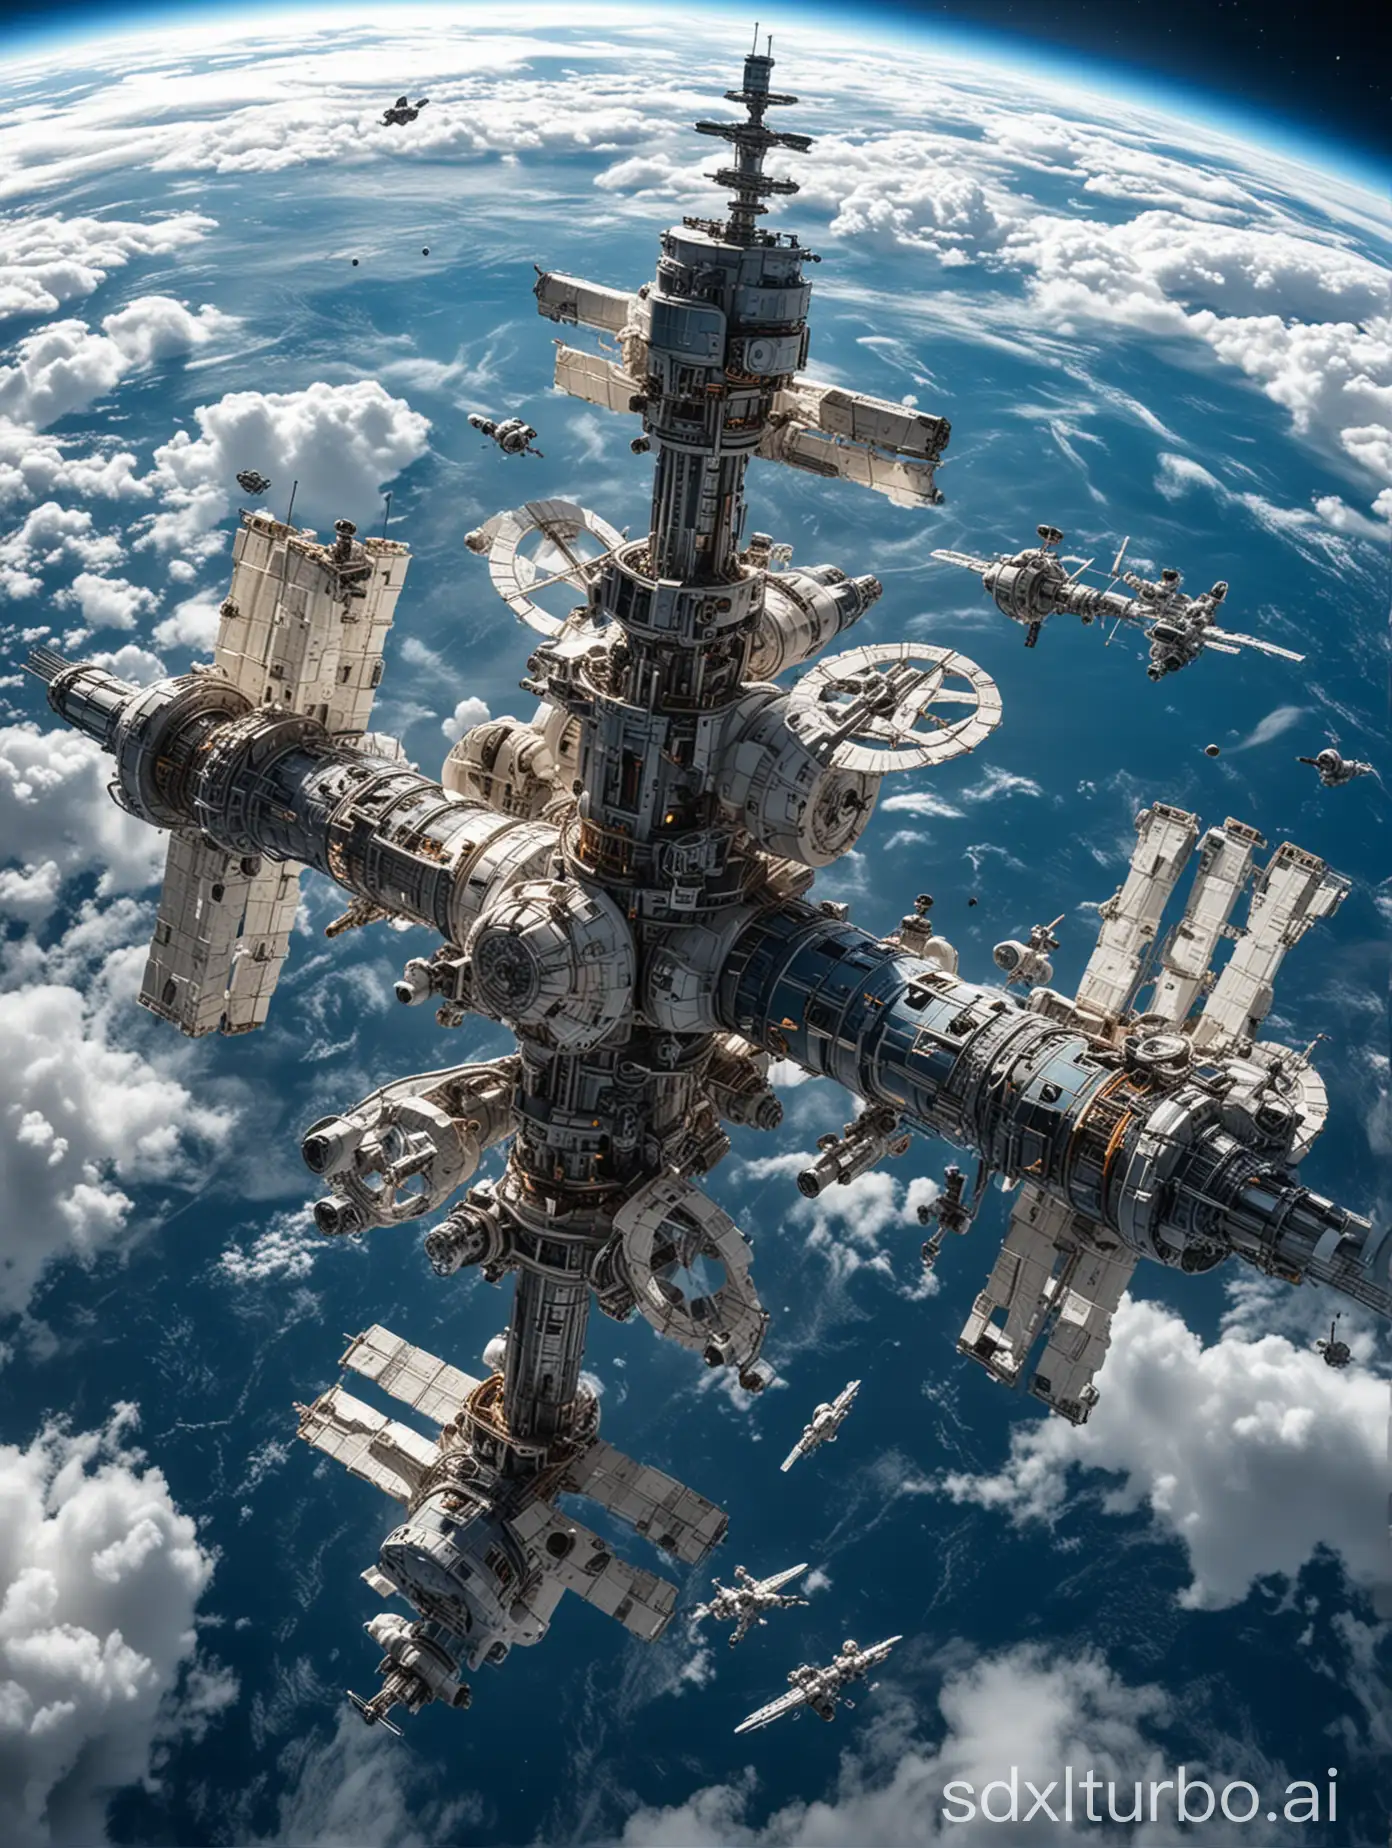 A massive, intricate futuristic space station floating above Earth amidst fluffy, white clouds. The structure is cylindrical with various platforms, towers, and mechanical appendages extending in all directions. Several satellite-like objects and spaceships orbit around the station. A vibrant blue sky dotted with stars can be seen in the distance, along with a visible view of Earth, showcasing continents, oceans, and a portion of the atmosphere.